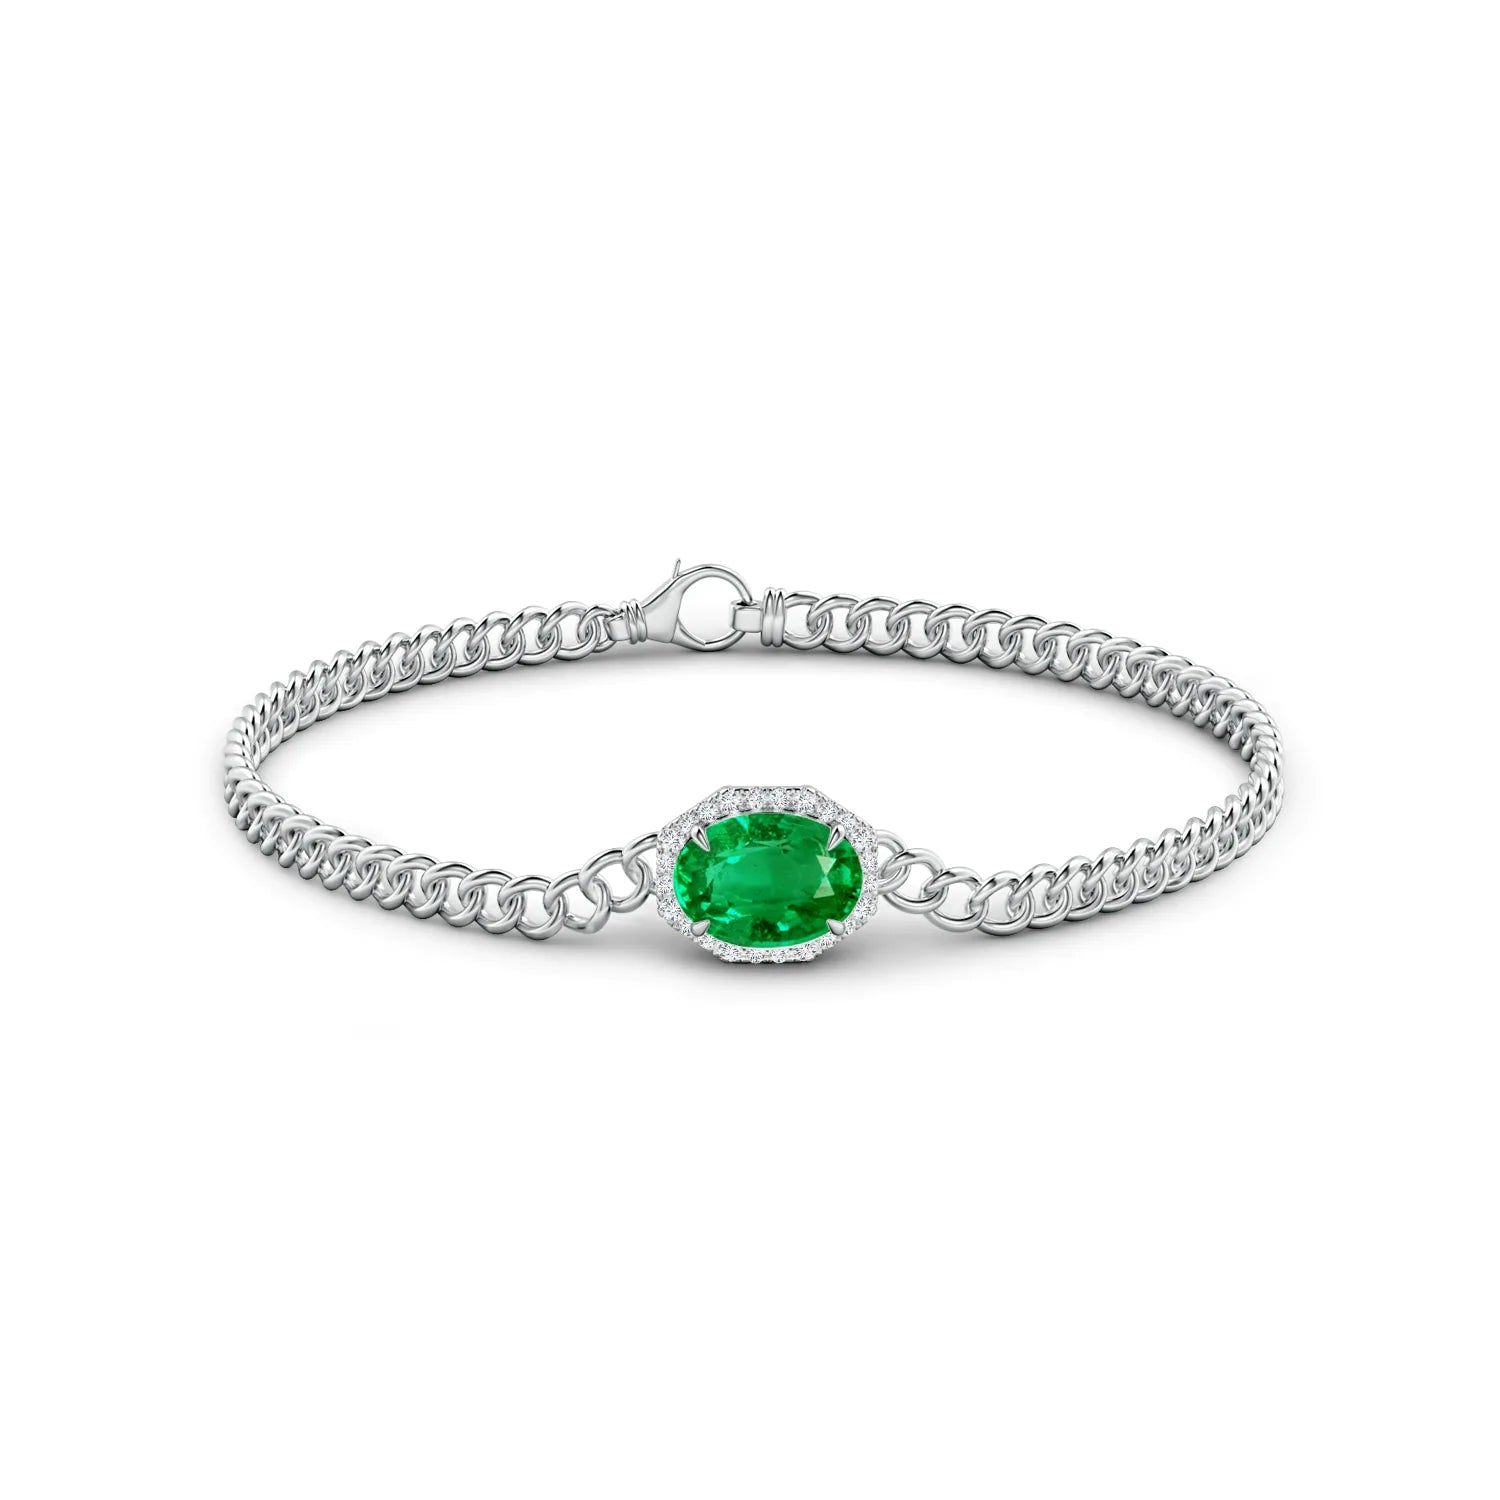 2.14 CT. Halo Oval Emerald Bracelet with Octagonal